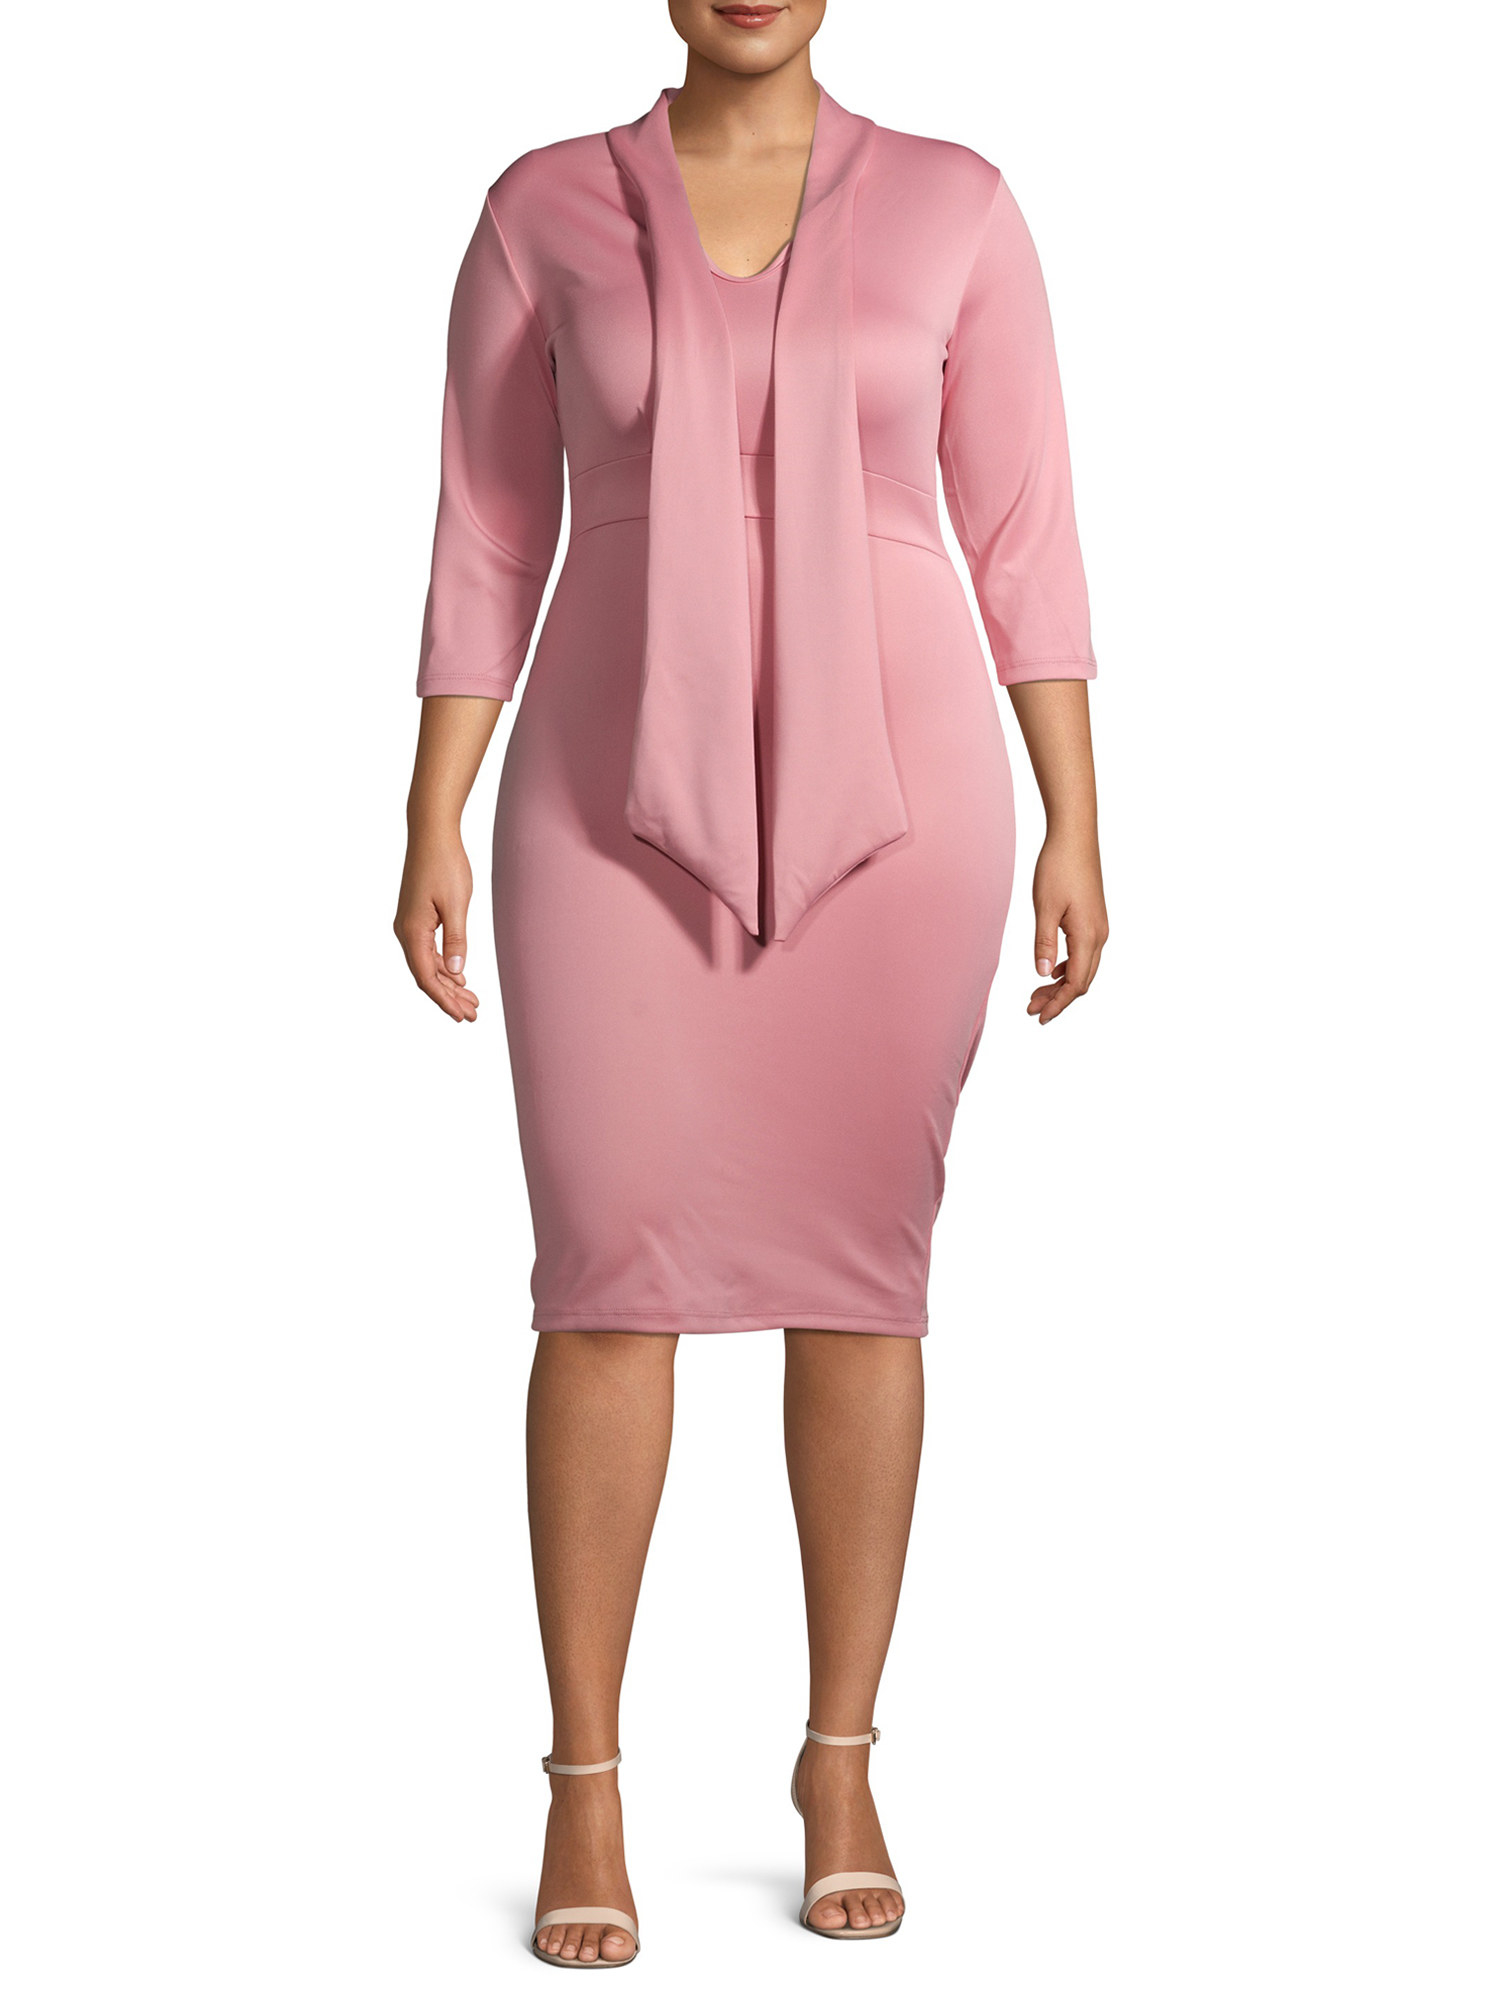 a model in the form-fitting pink dress